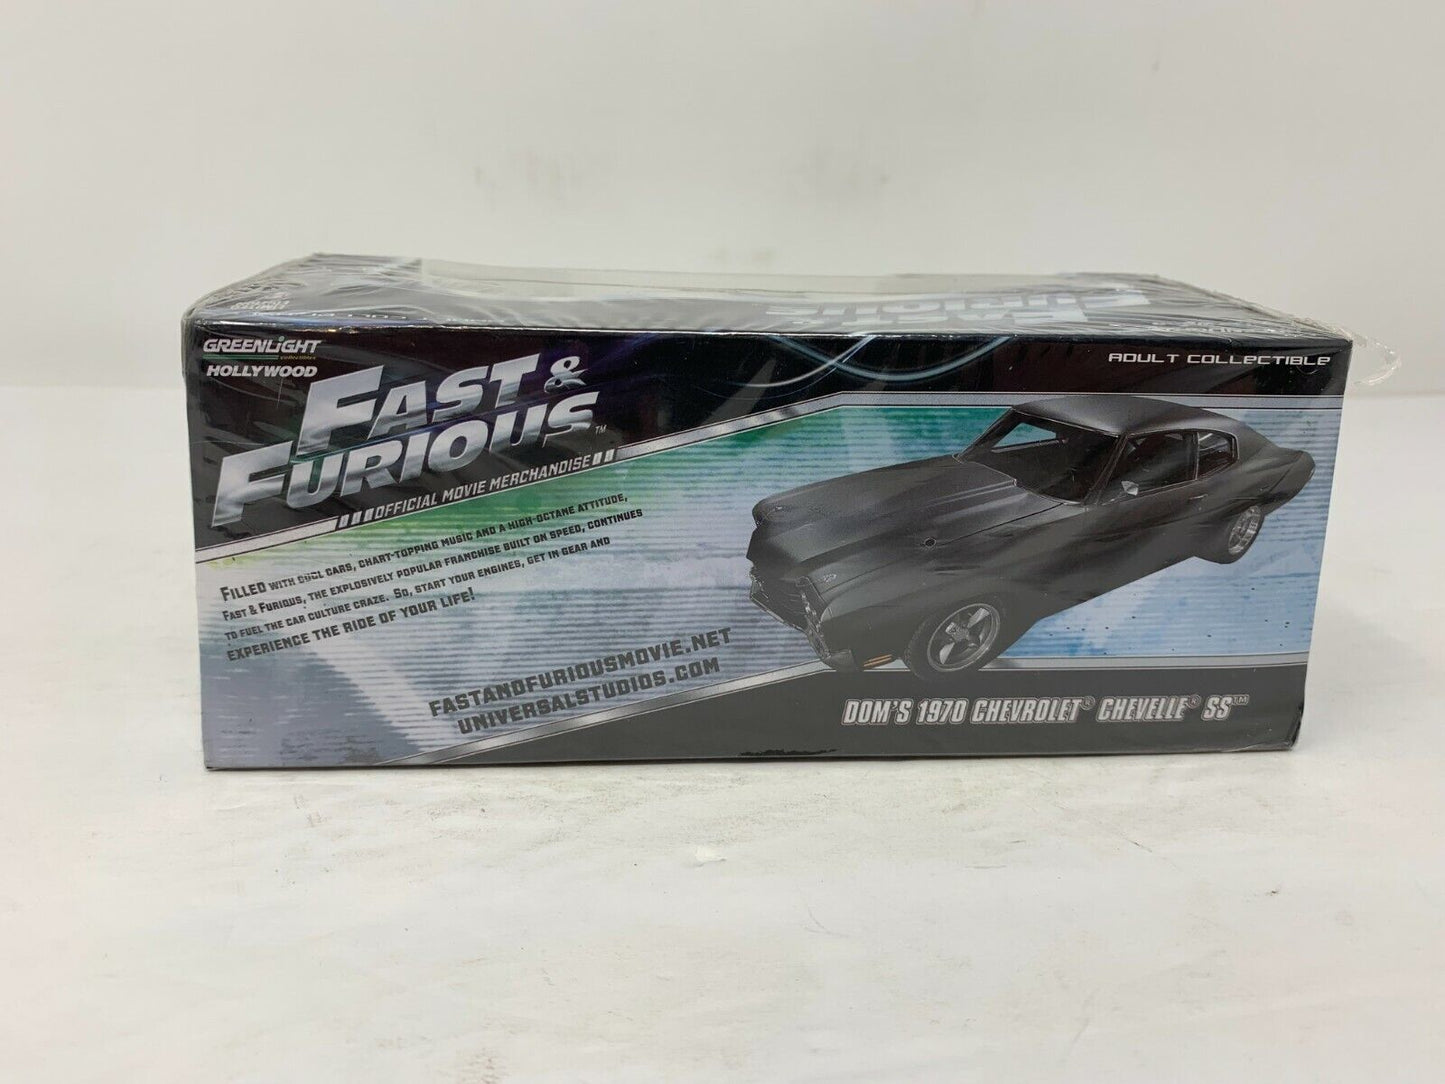 Greenlight Fast & Furious Dom's 1970 Chevrolet Chevelle SS 1:43 Diecast